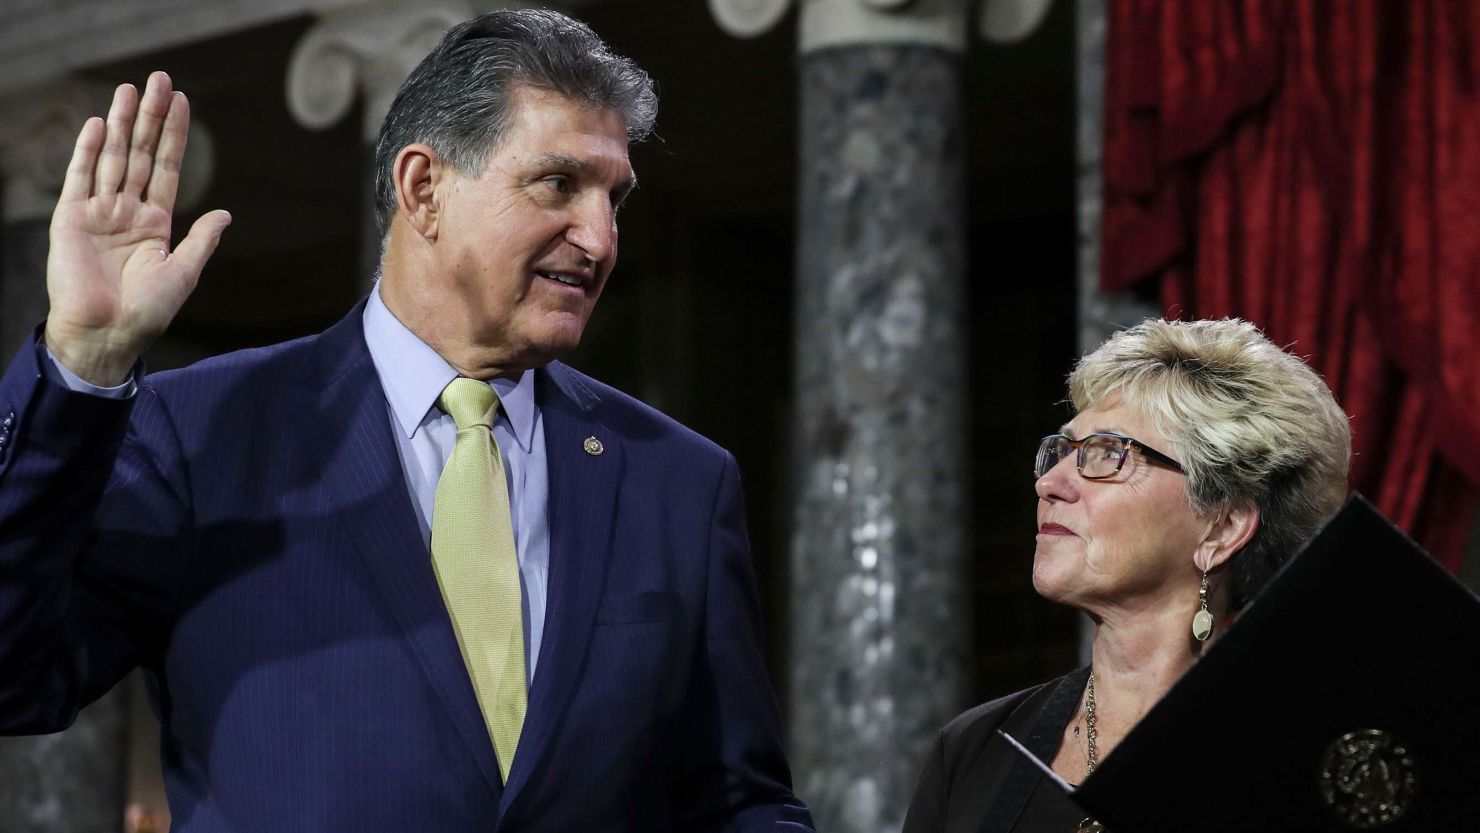 Sen. Joe Manchin is flanked his wife, Gayle Manchin, as he is sworn in on January 3, 2019.